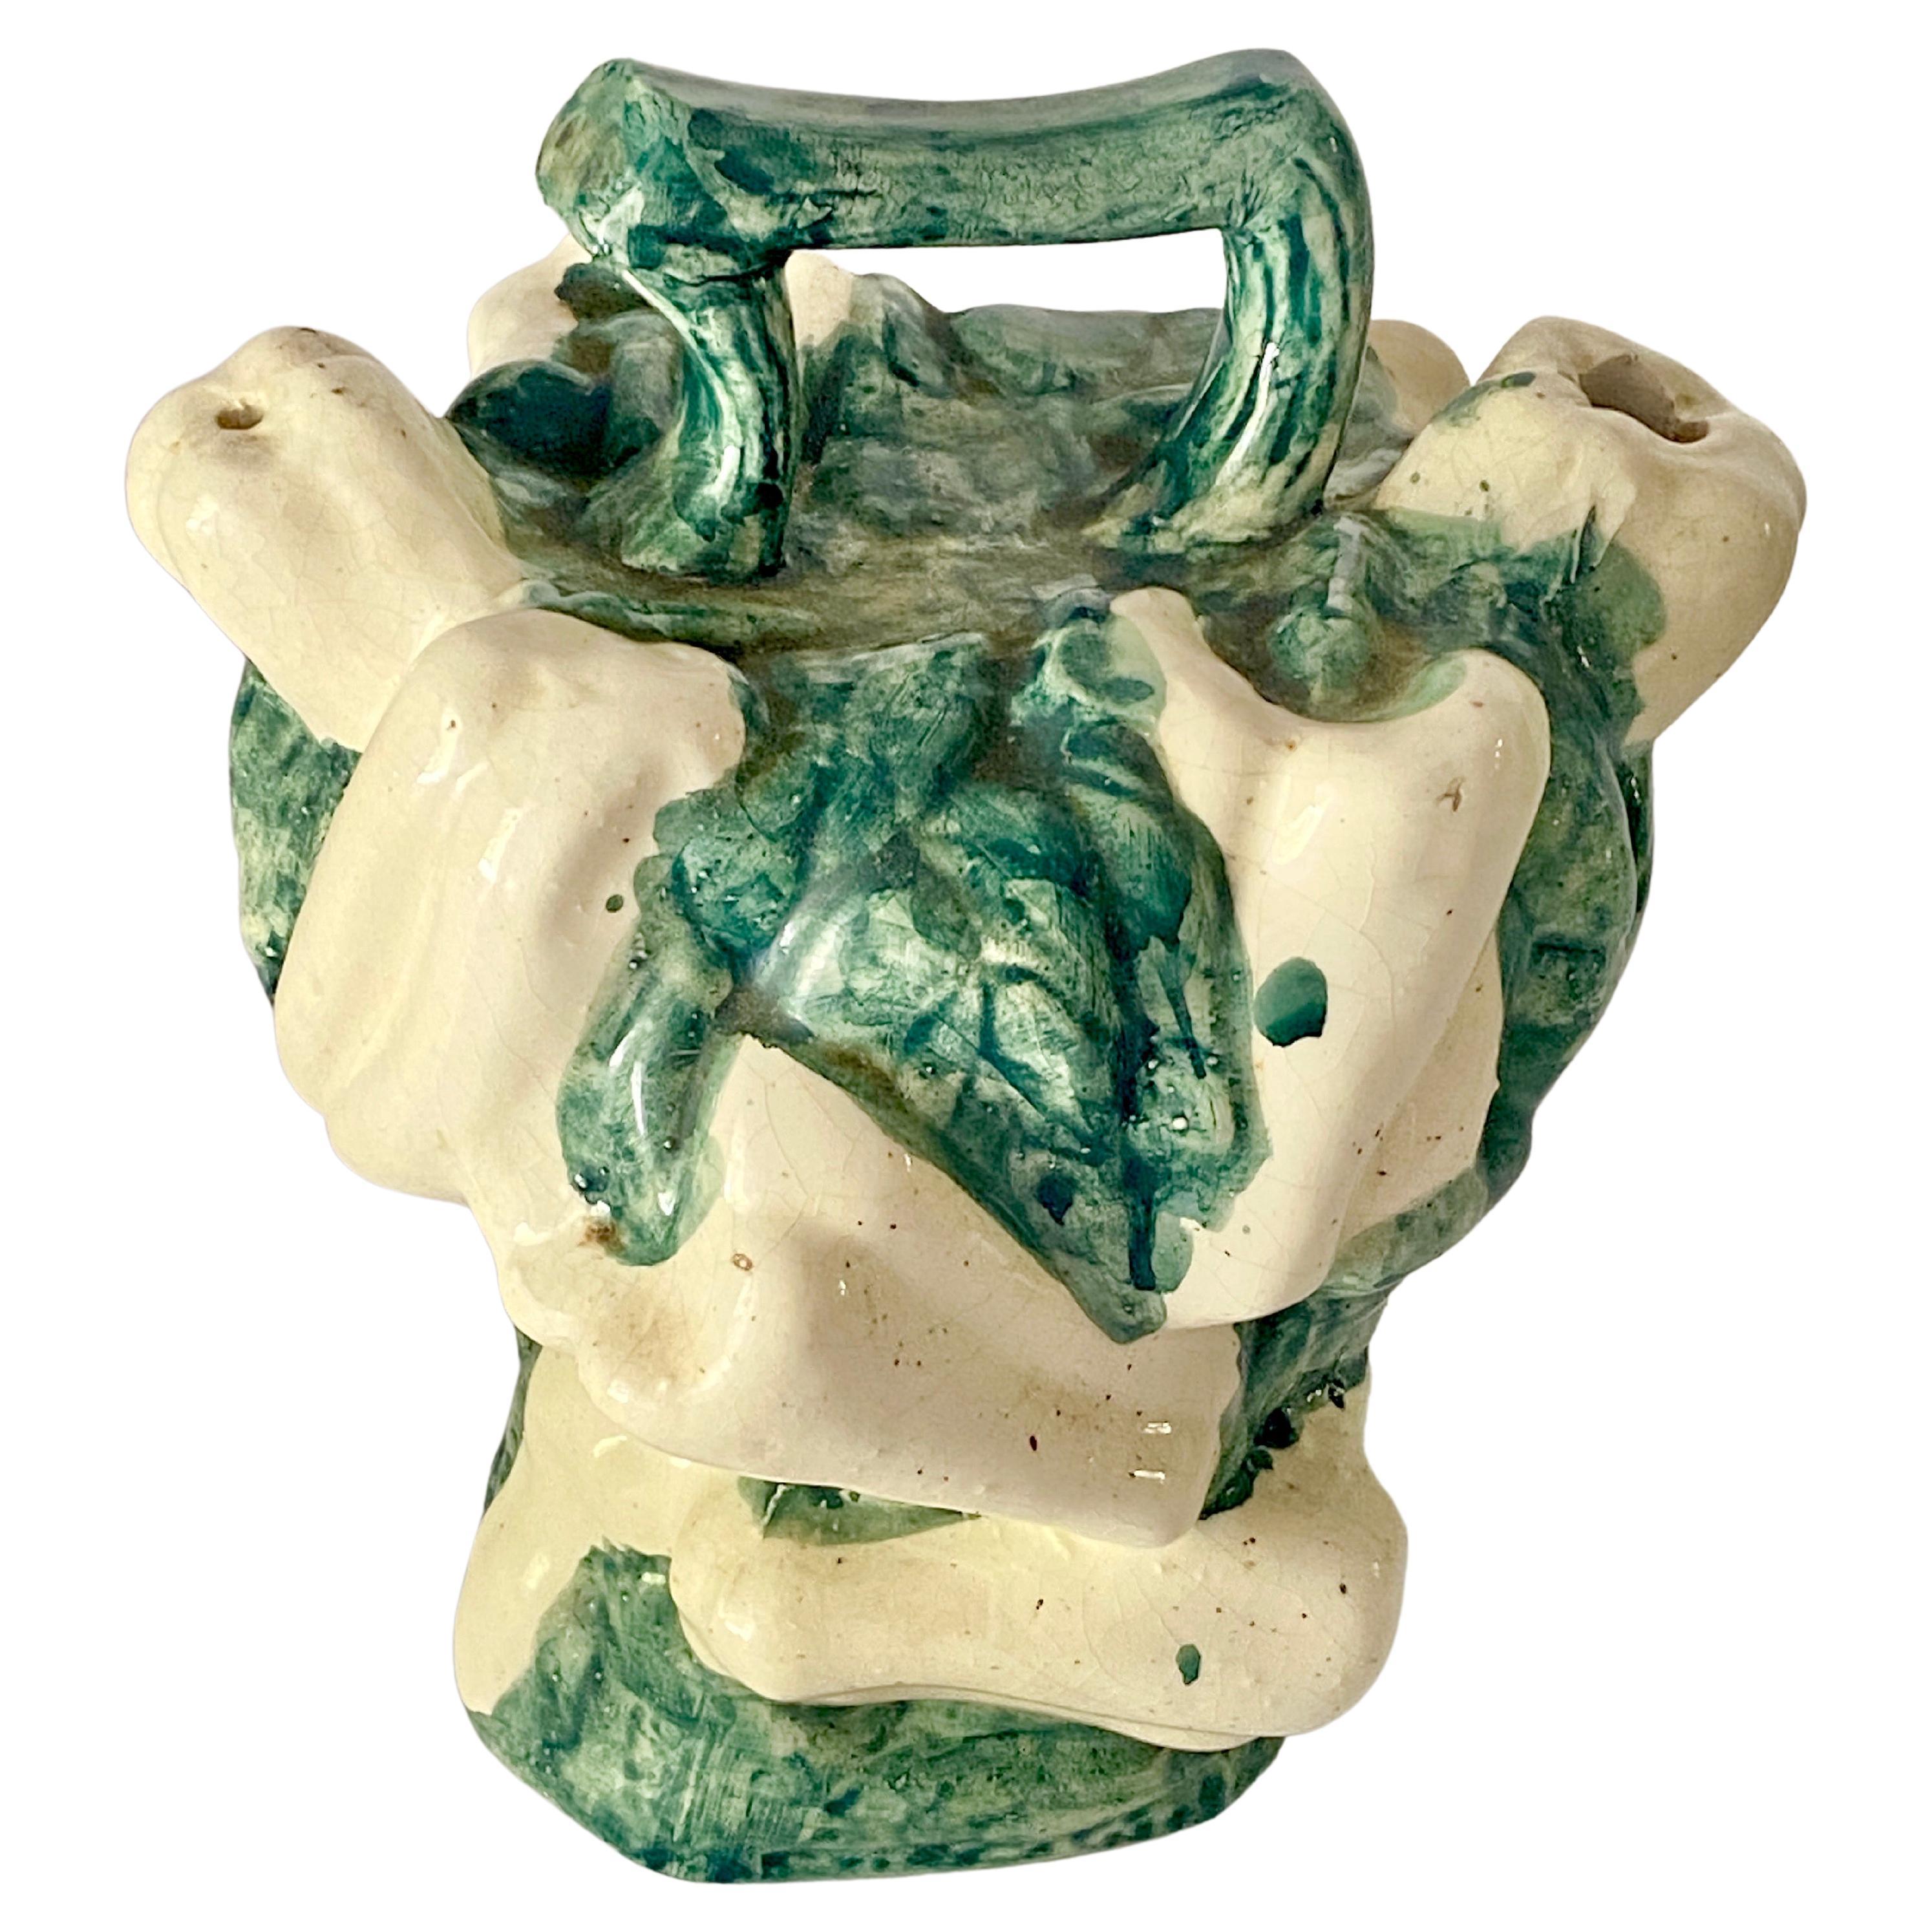 Thus Jug is a very rare model. It is large, and it's free form is totally unusual. You but the watter through one hole of the majolica pitcher And the water will flow through the other hole of the jug, to serve water or whatever.
It has been made